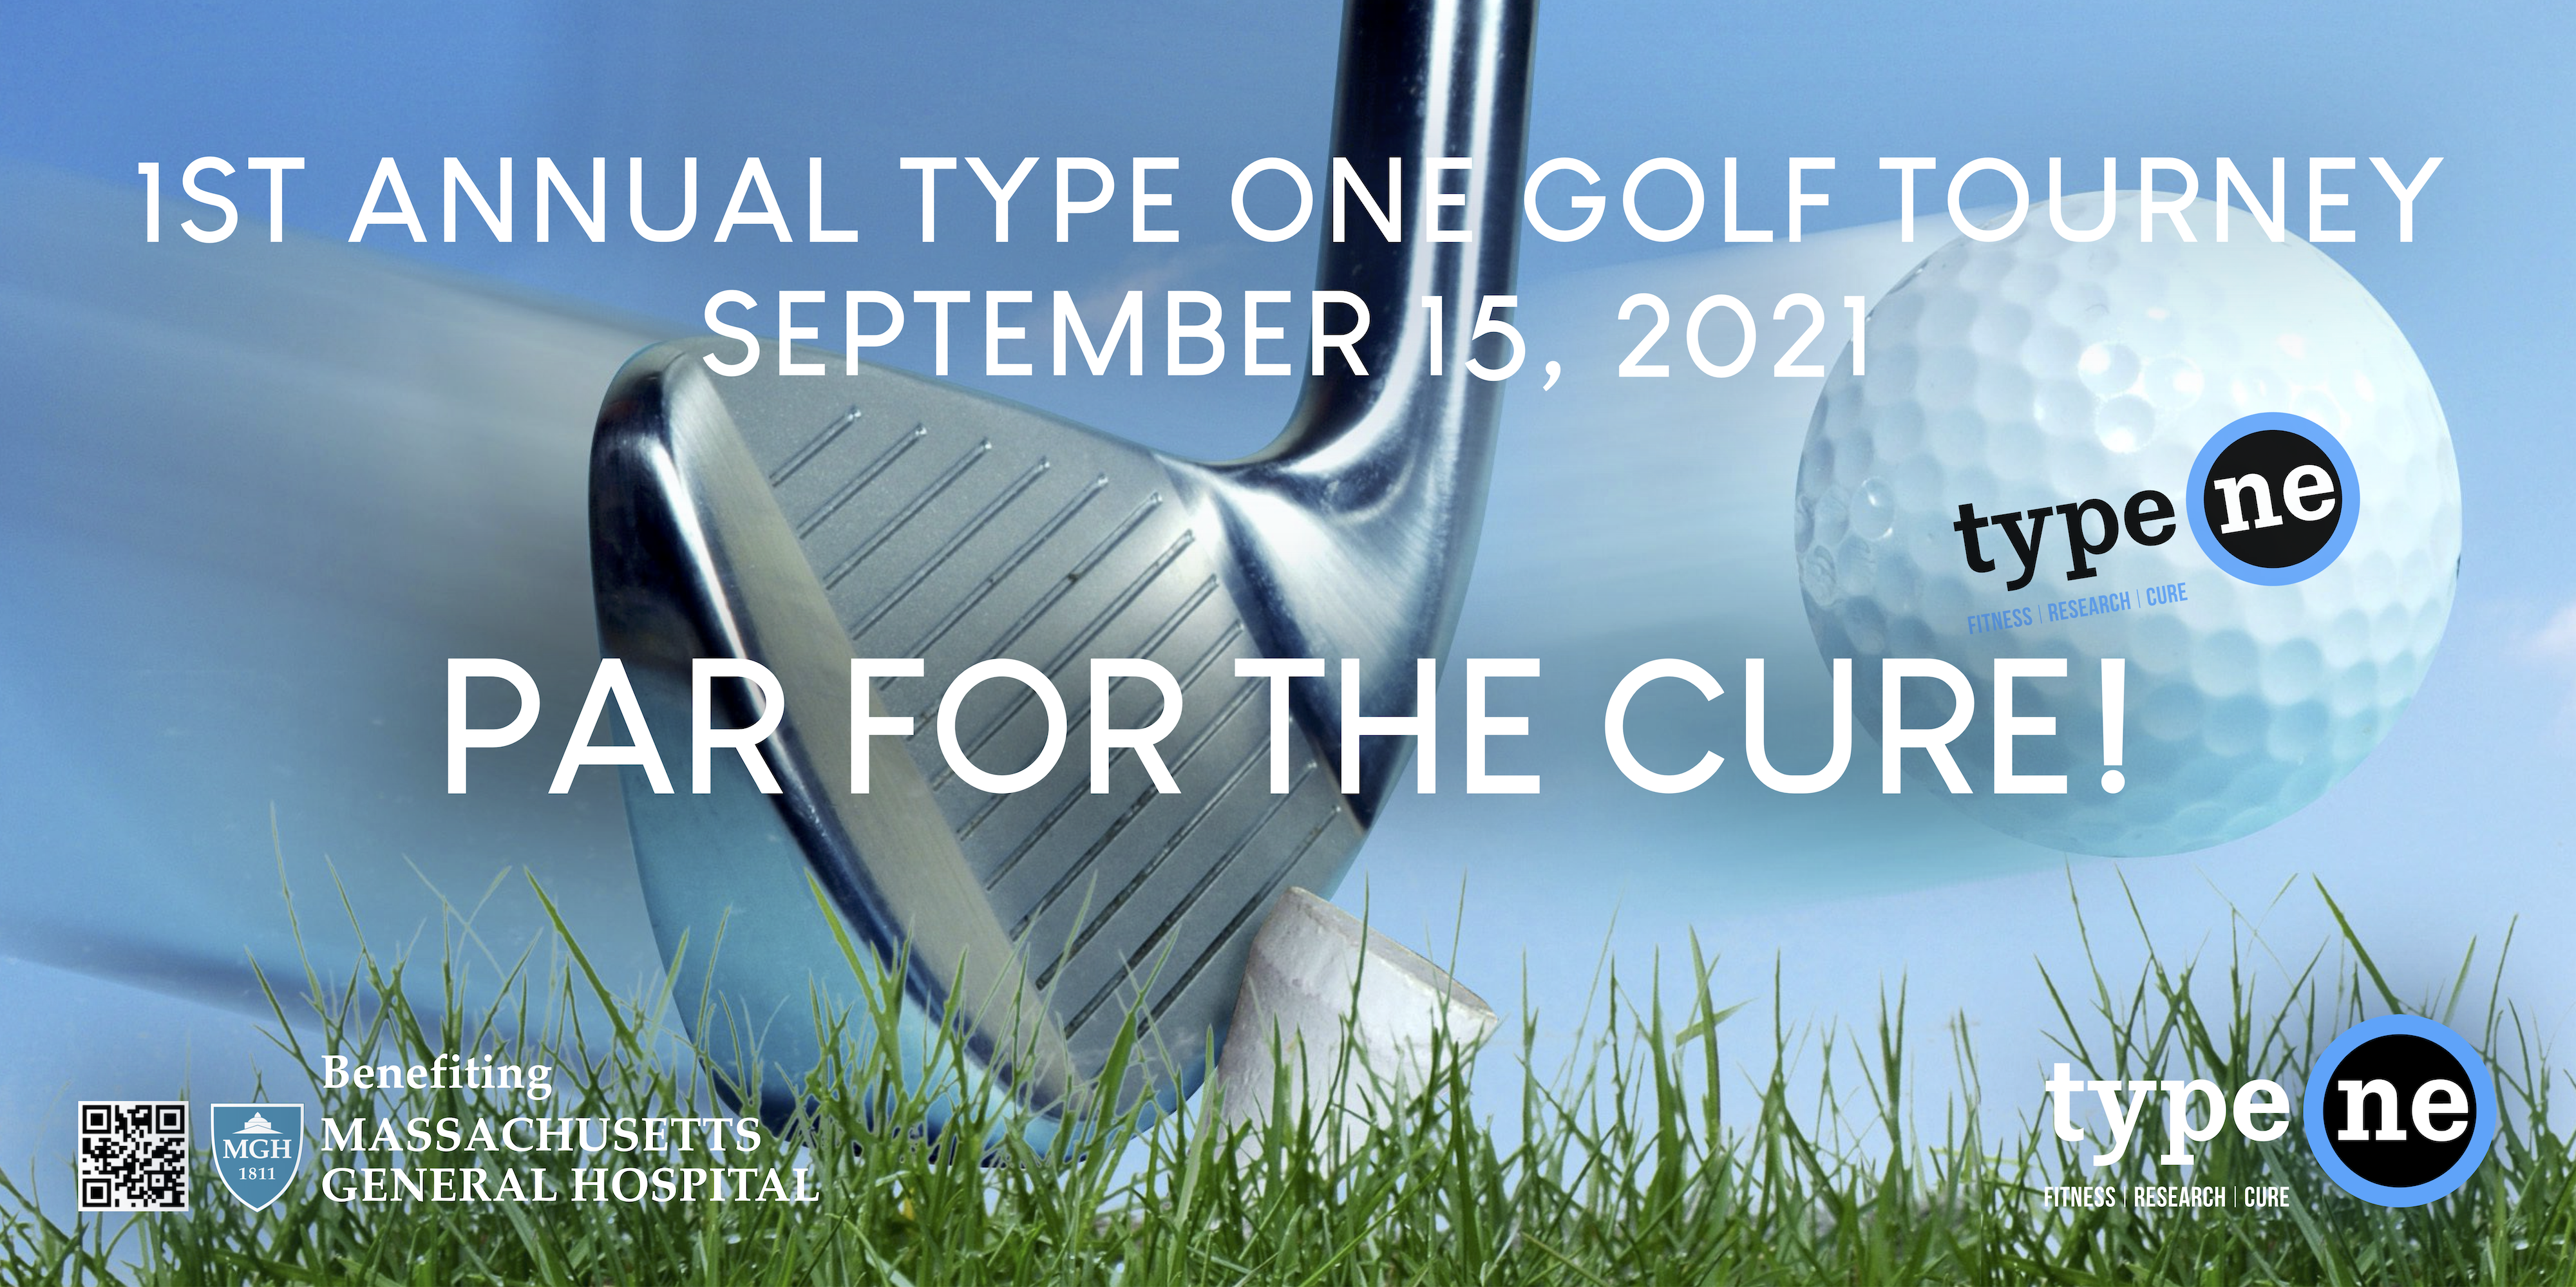 Par For The Cure! Type One Golf Tournament